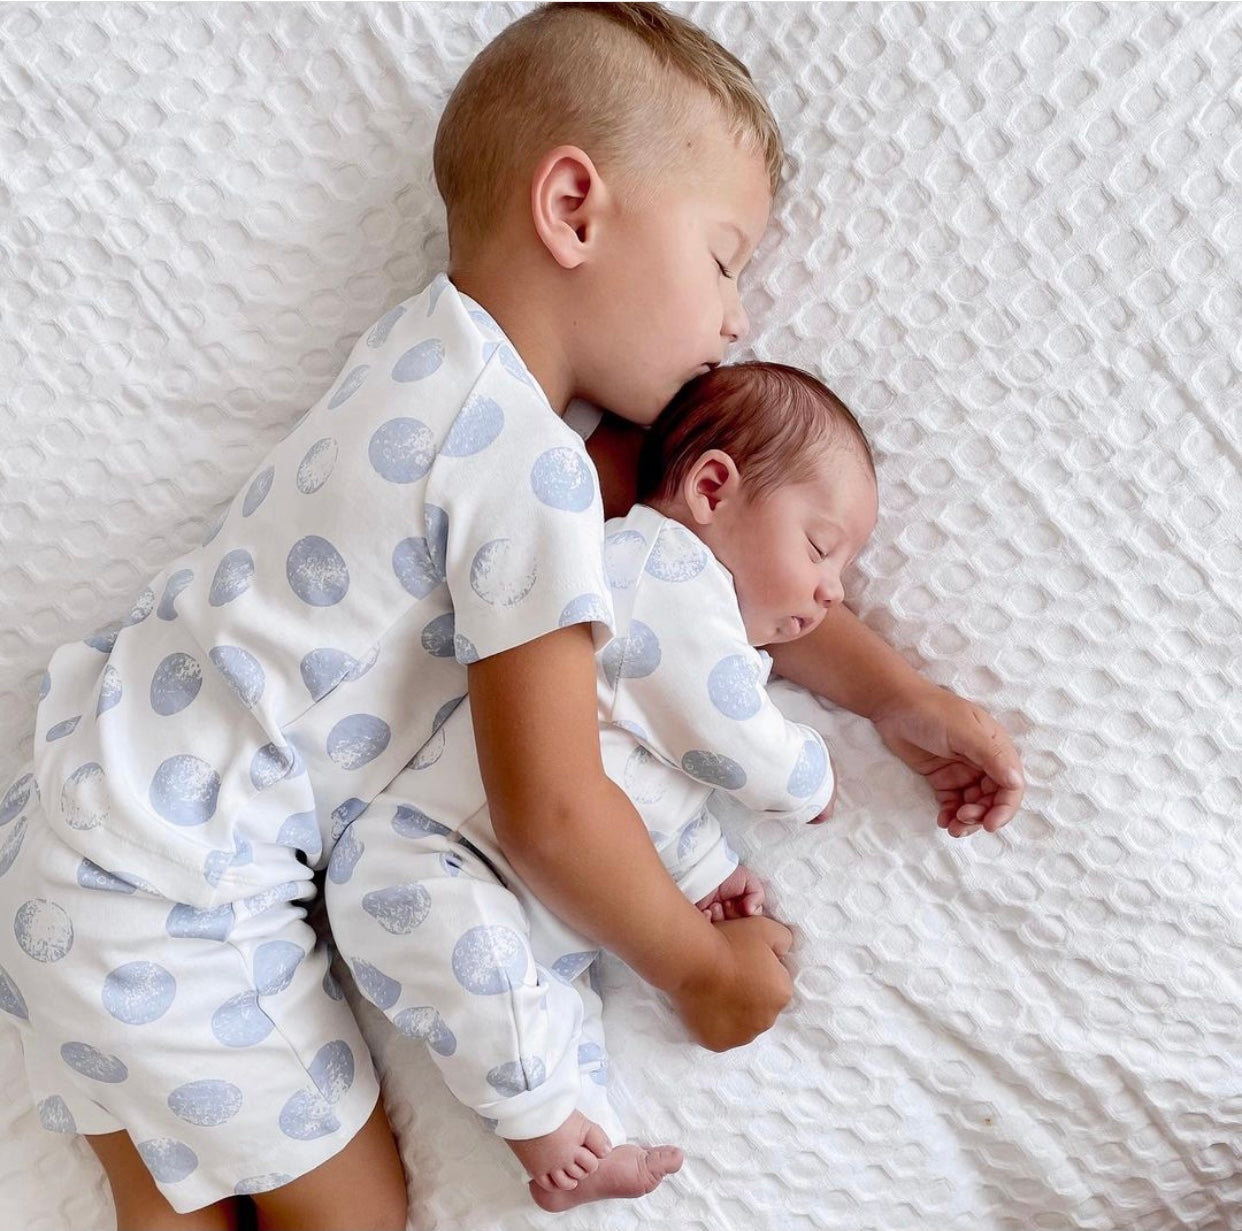 Six steps to more sleep for baby (and you!).